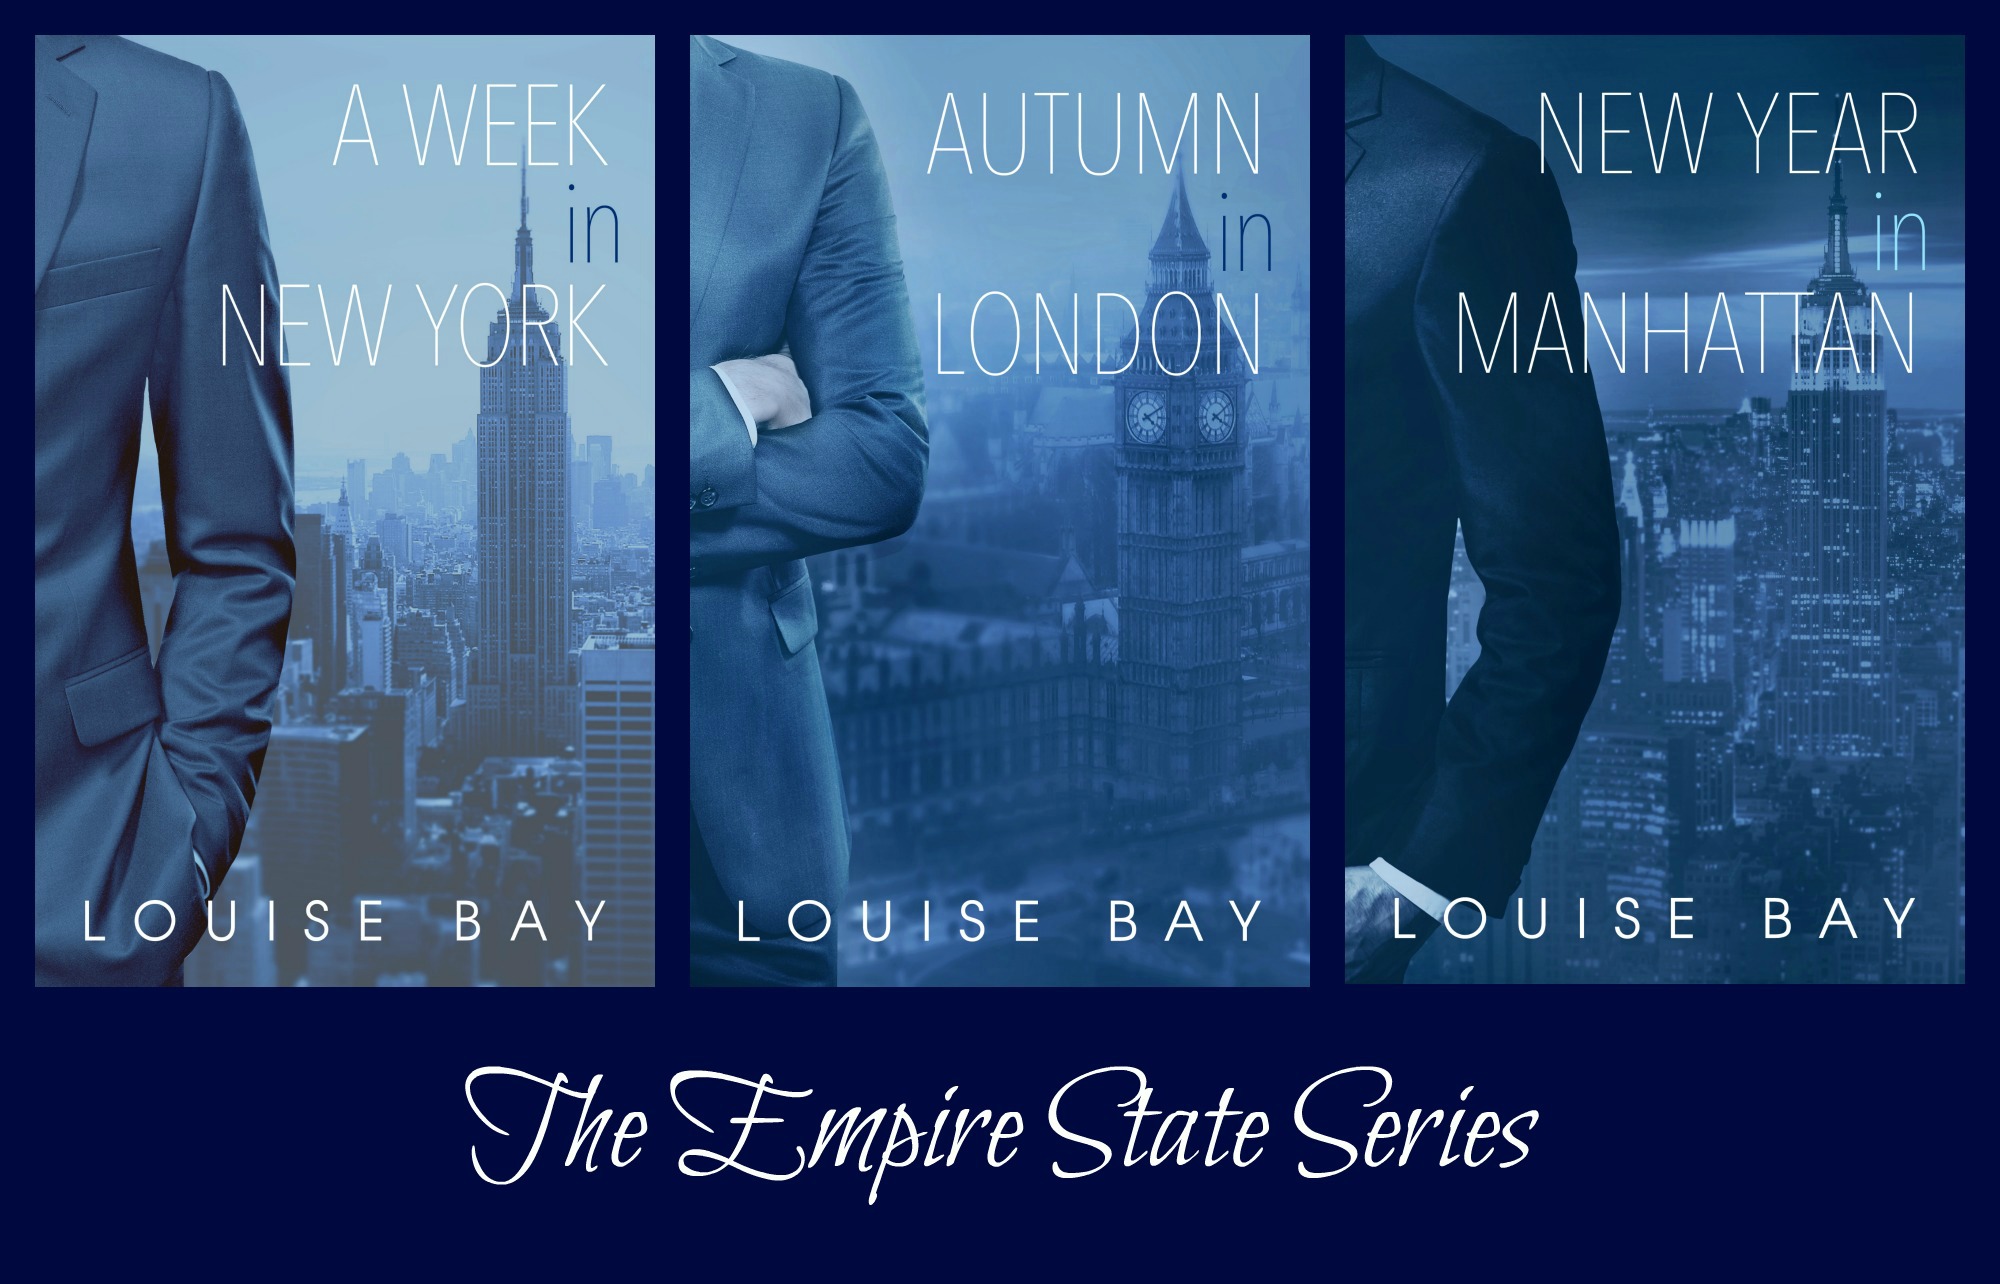 The Empire State Series: A Week in New York, Autumn in London, New Year in  Manhattan